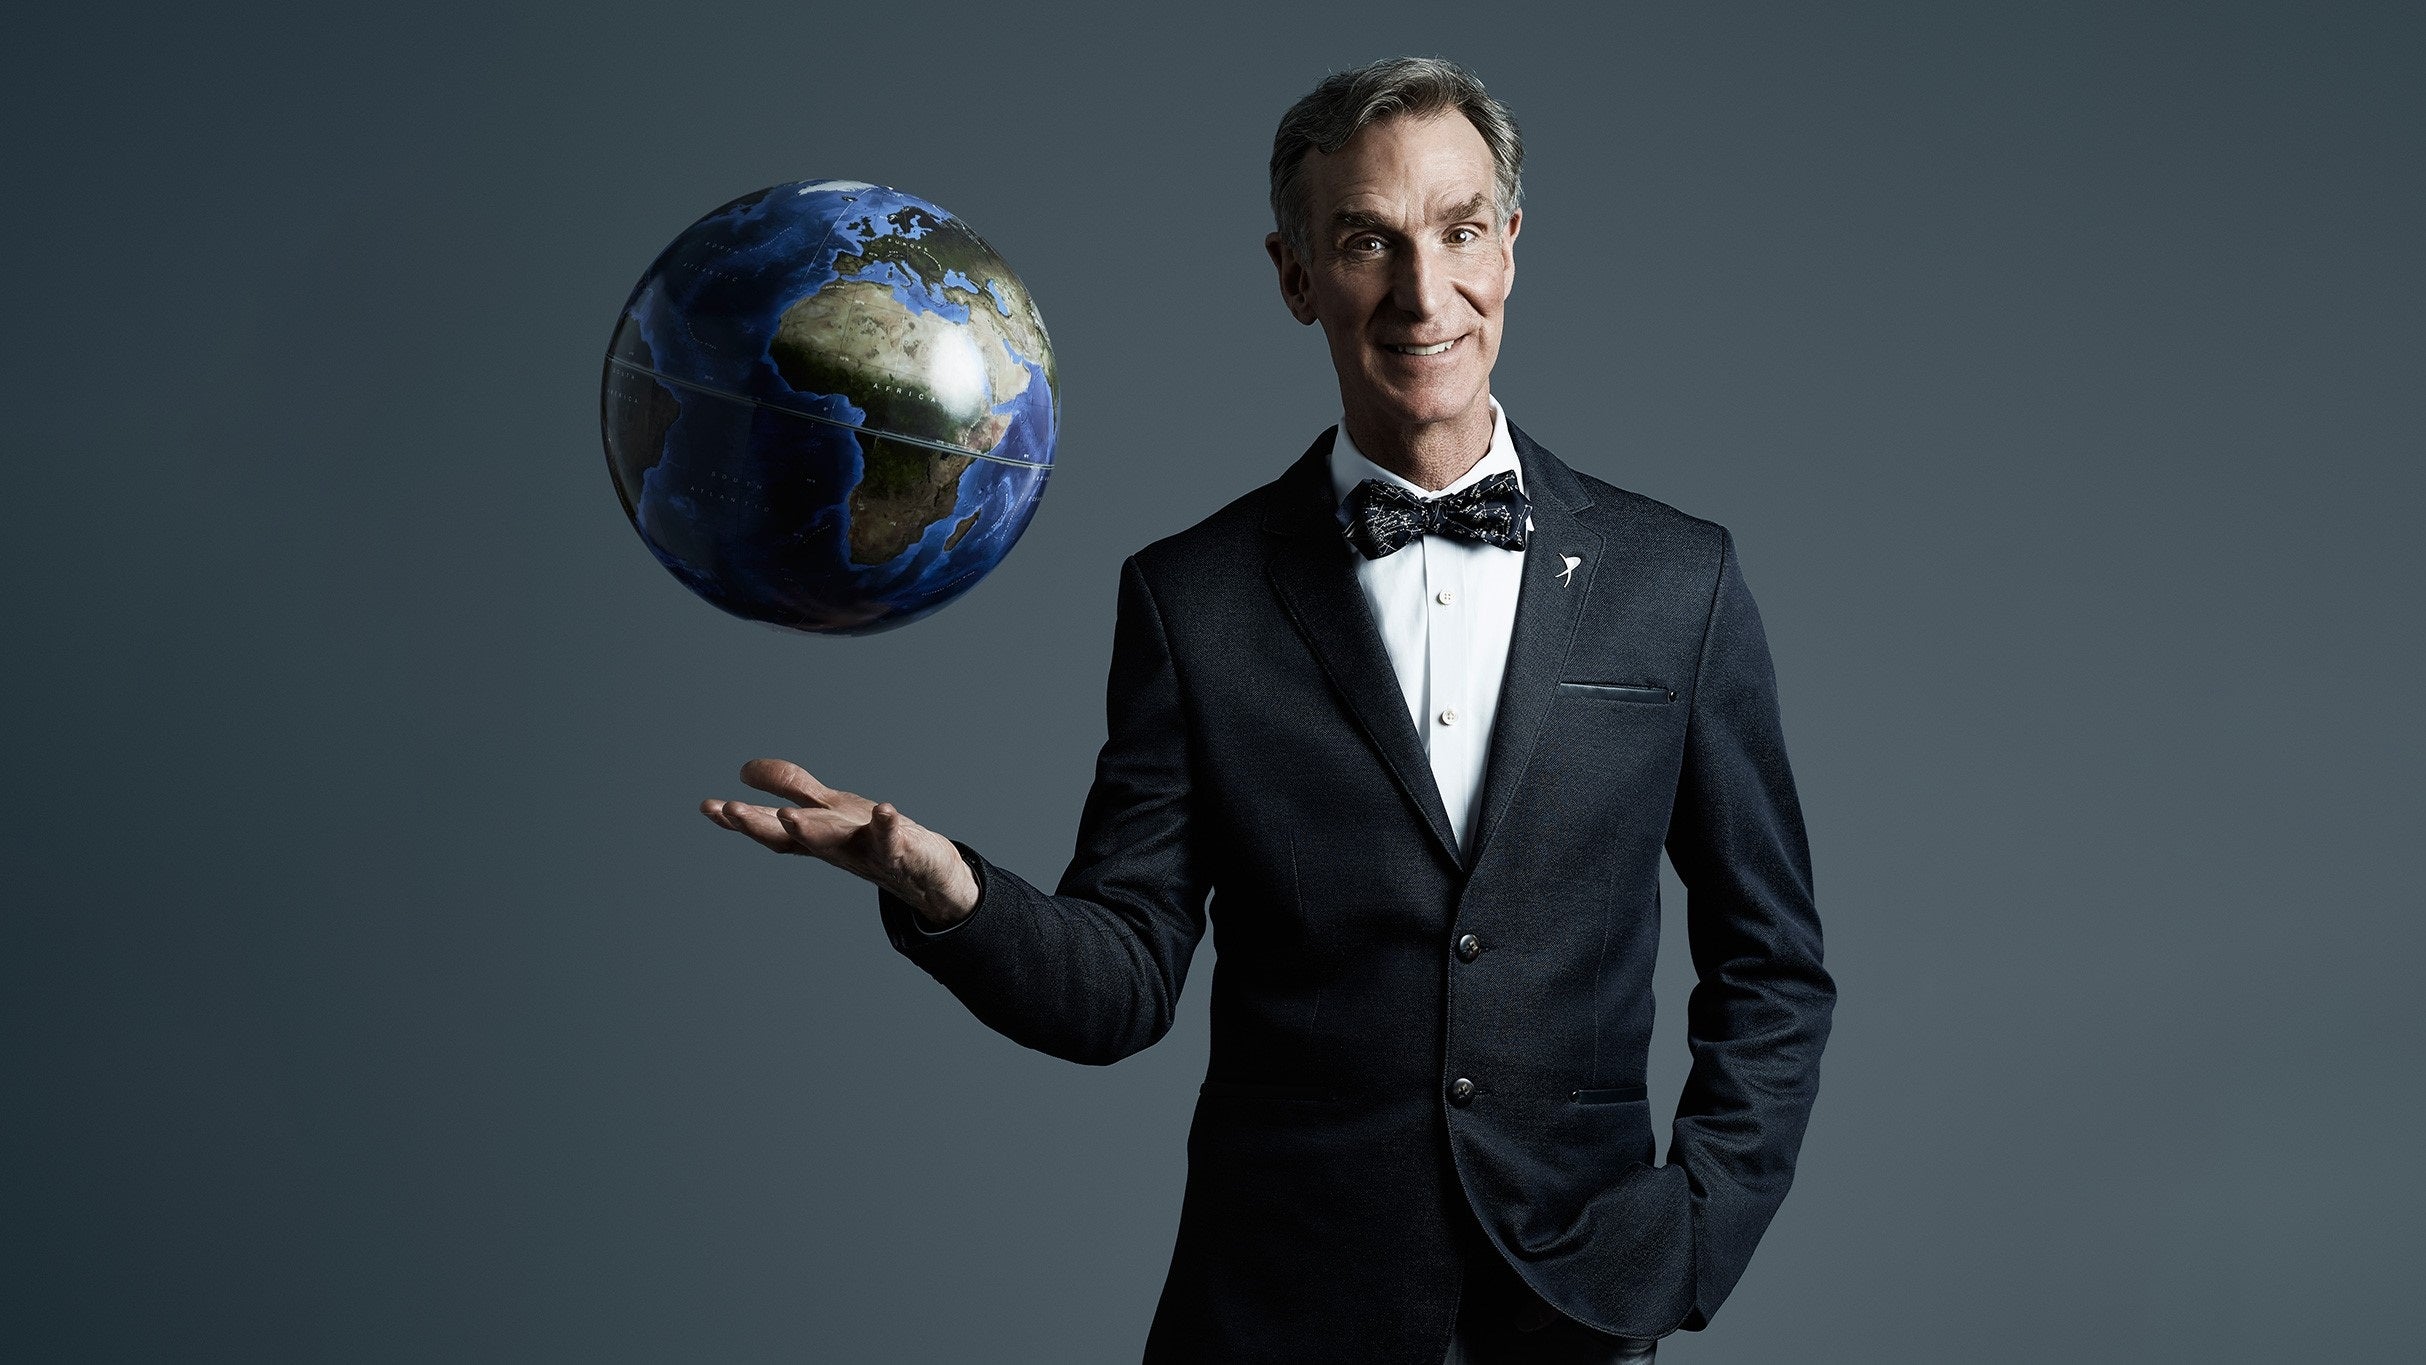 Bill Nye The Science Guy in Minneapolis promo photo for Hennepin Theatre Trust presale offer code